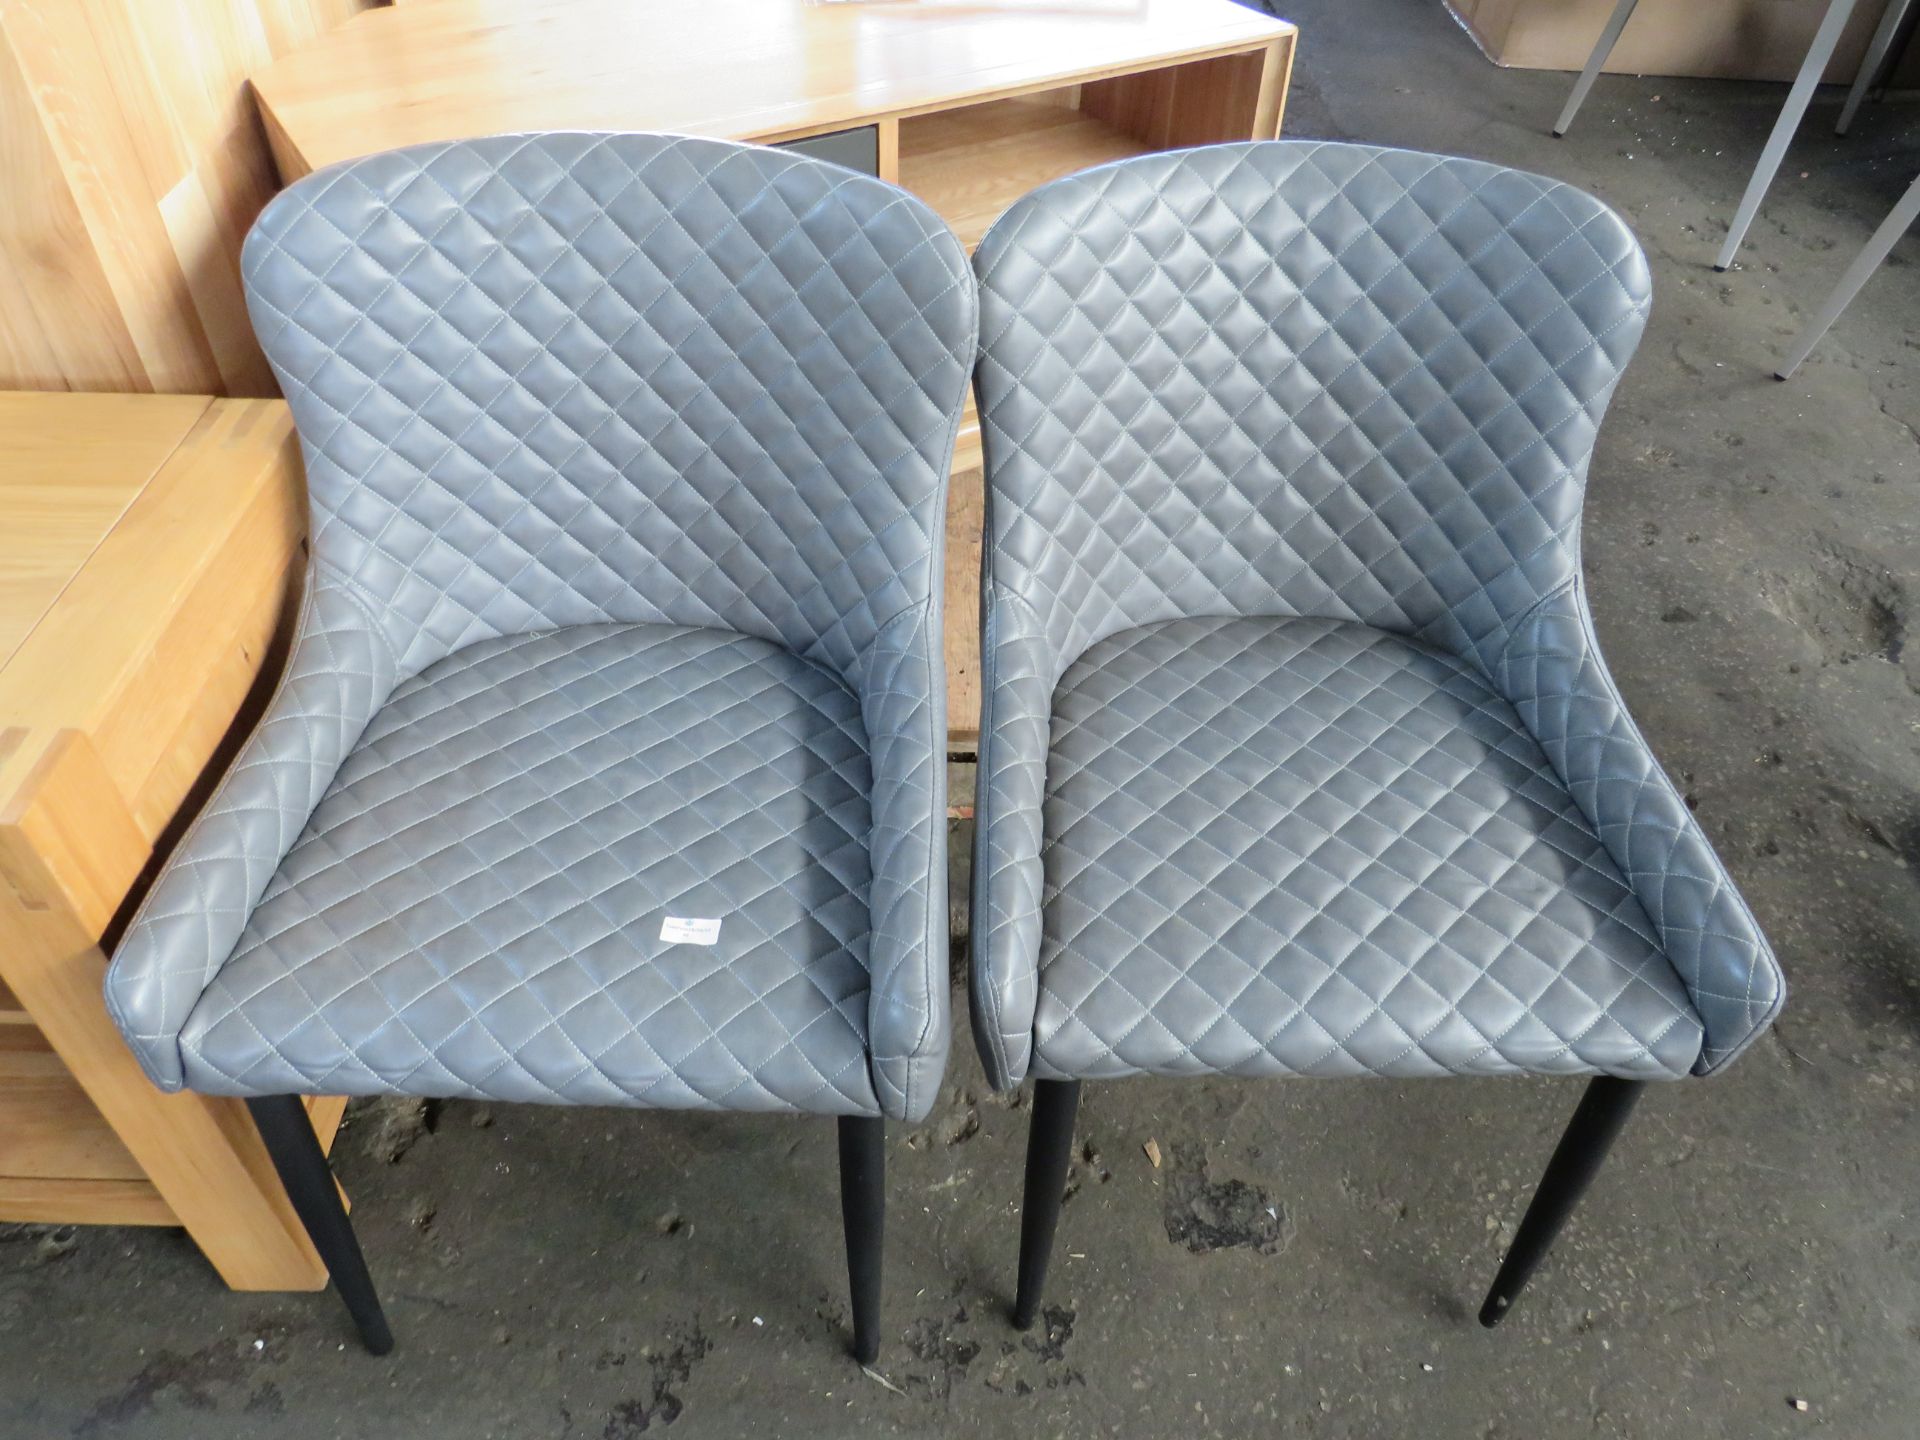 Pair of Cezanne Grey Faux Leather - Good Condition & Has A Few Minor Marks On The Legs - RRP £325